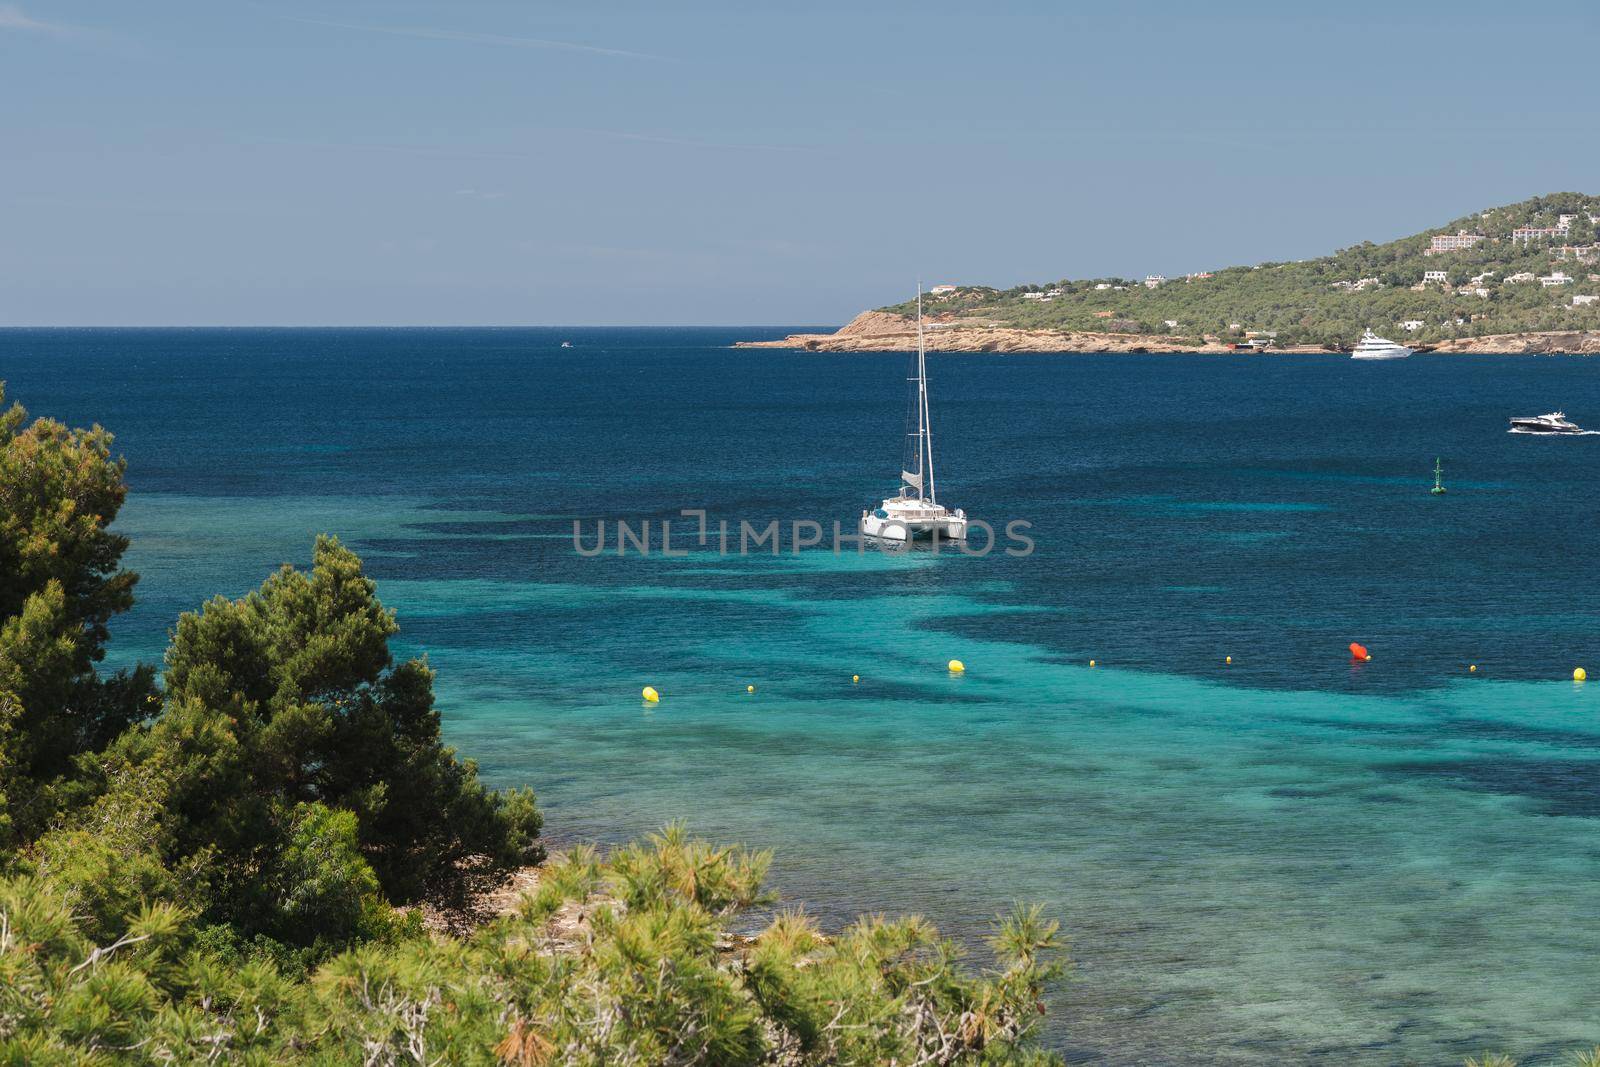 Sailing yacht stay in dream bay with turquoise transparent water. Ibiza island, Spain by apavlin